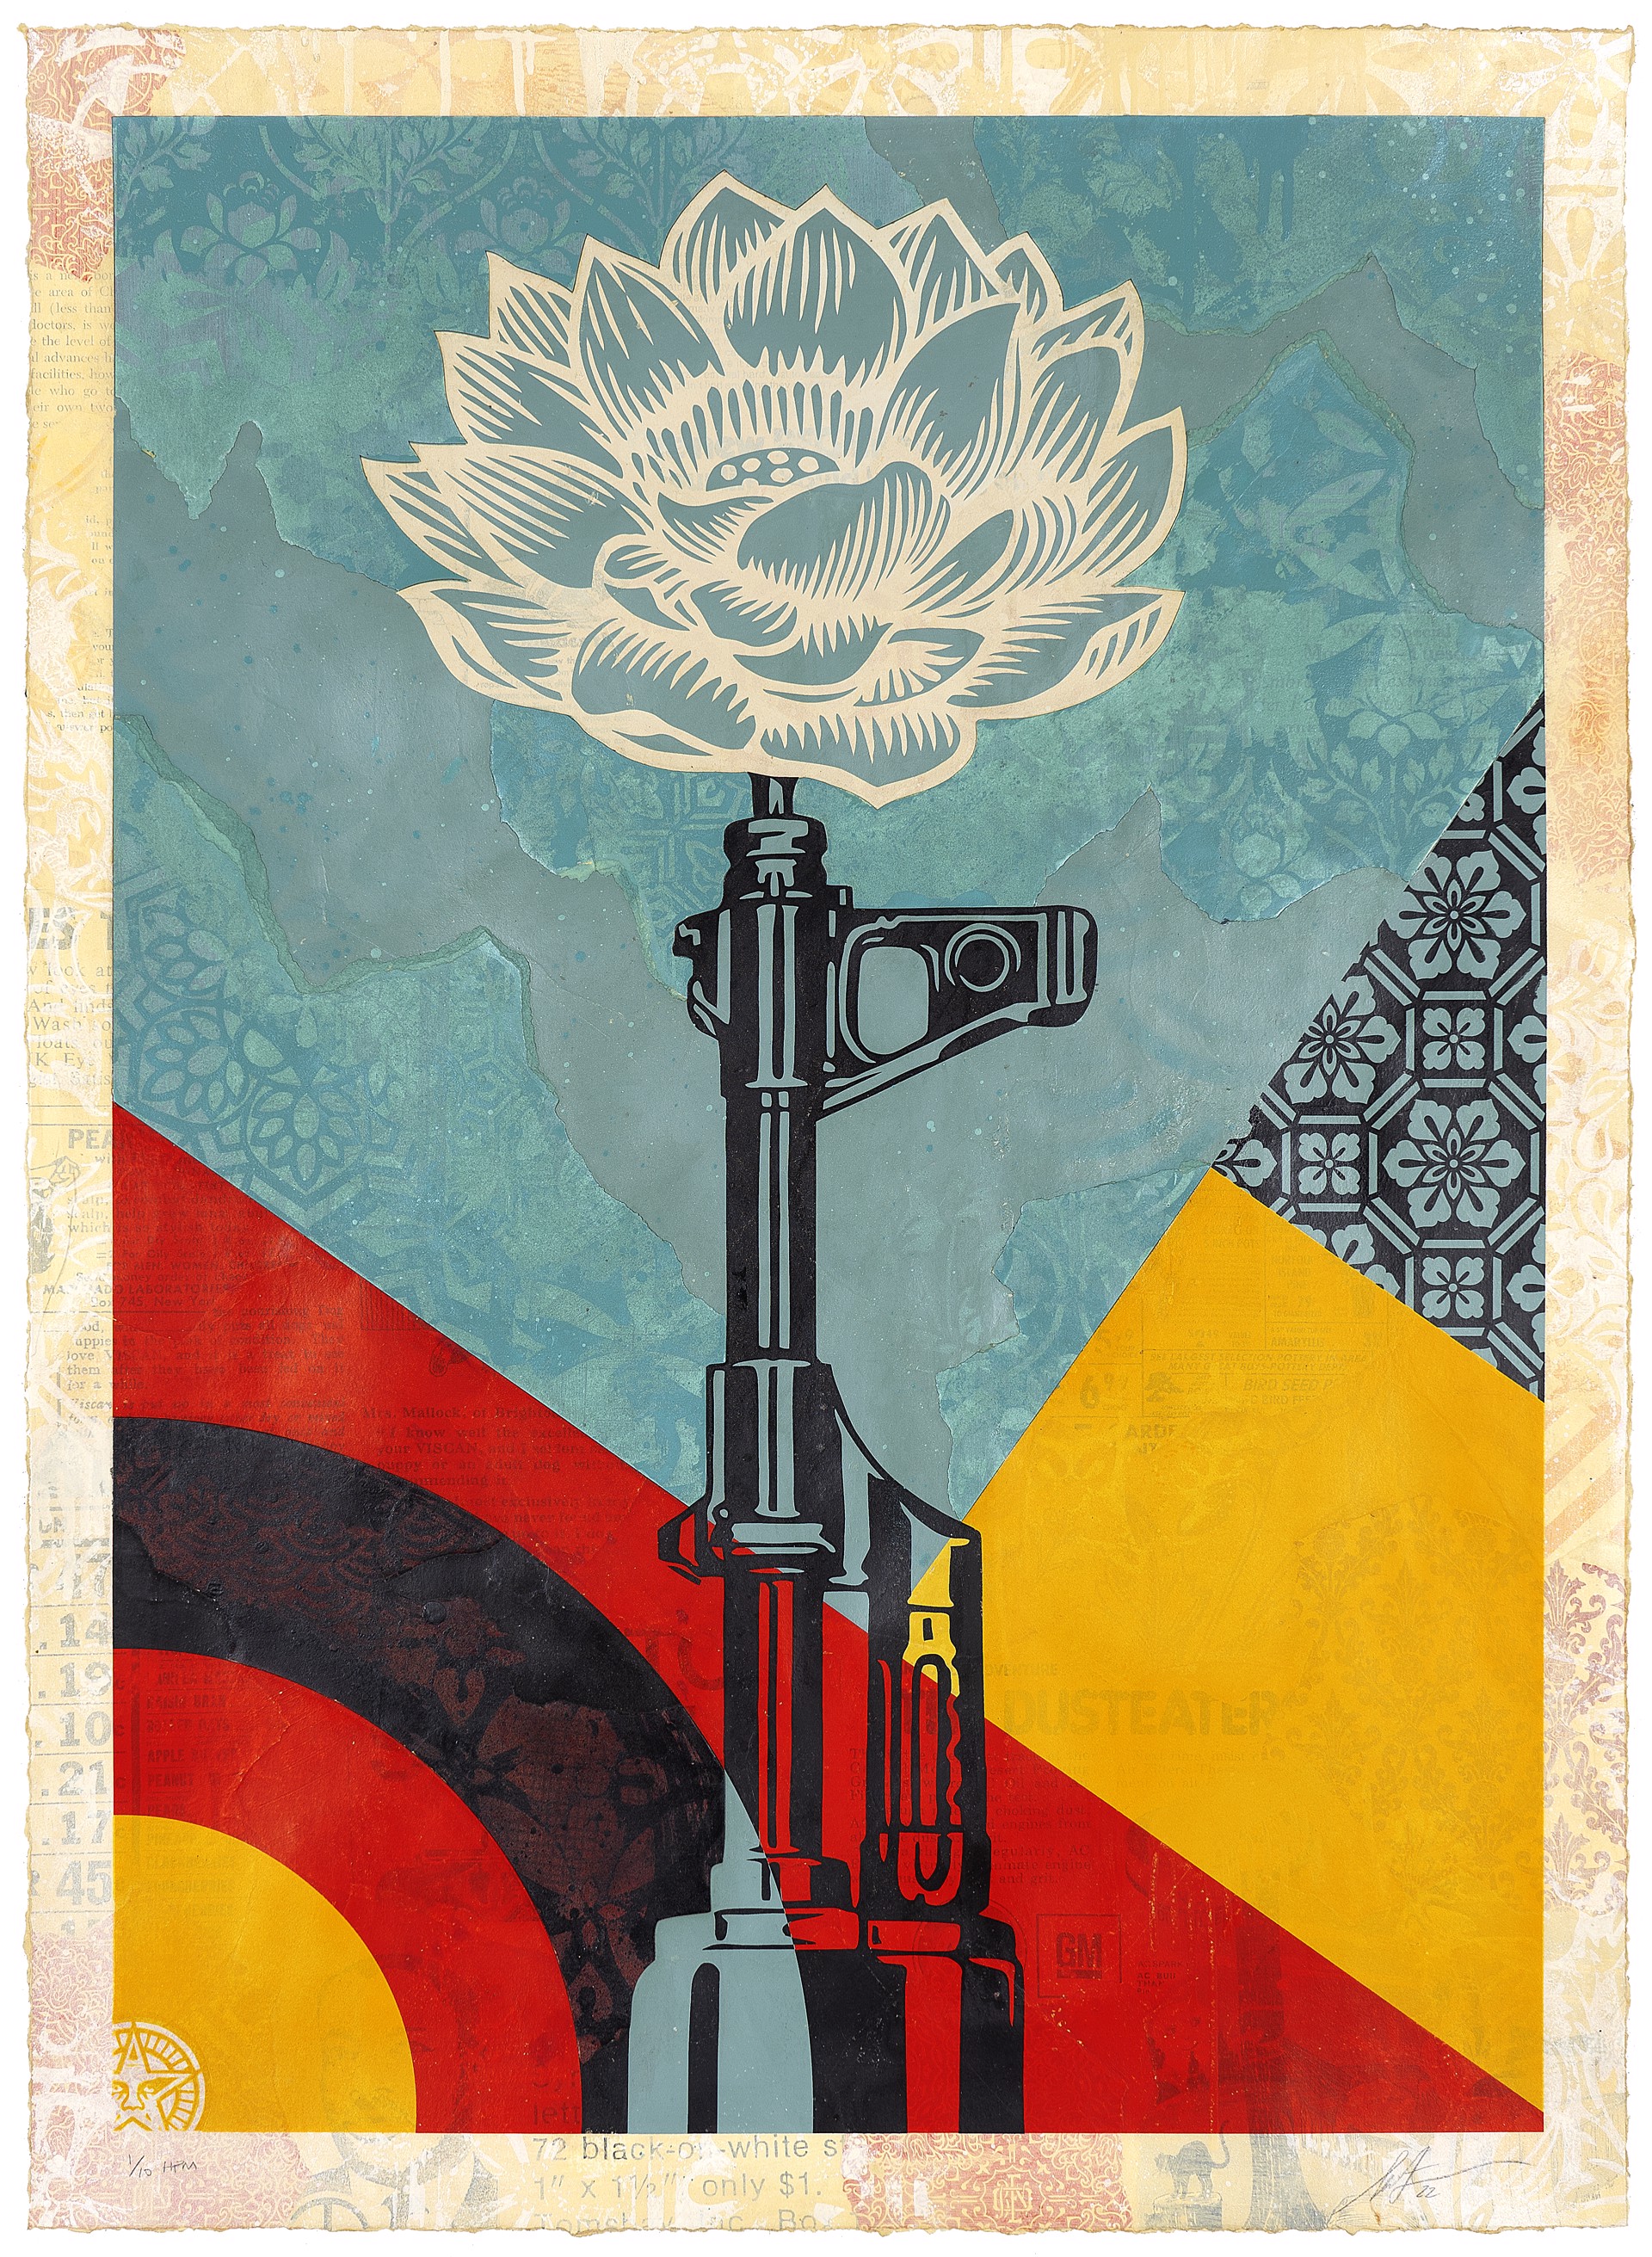 AK-47 Lotus by Shepard Fairey / Limited editions